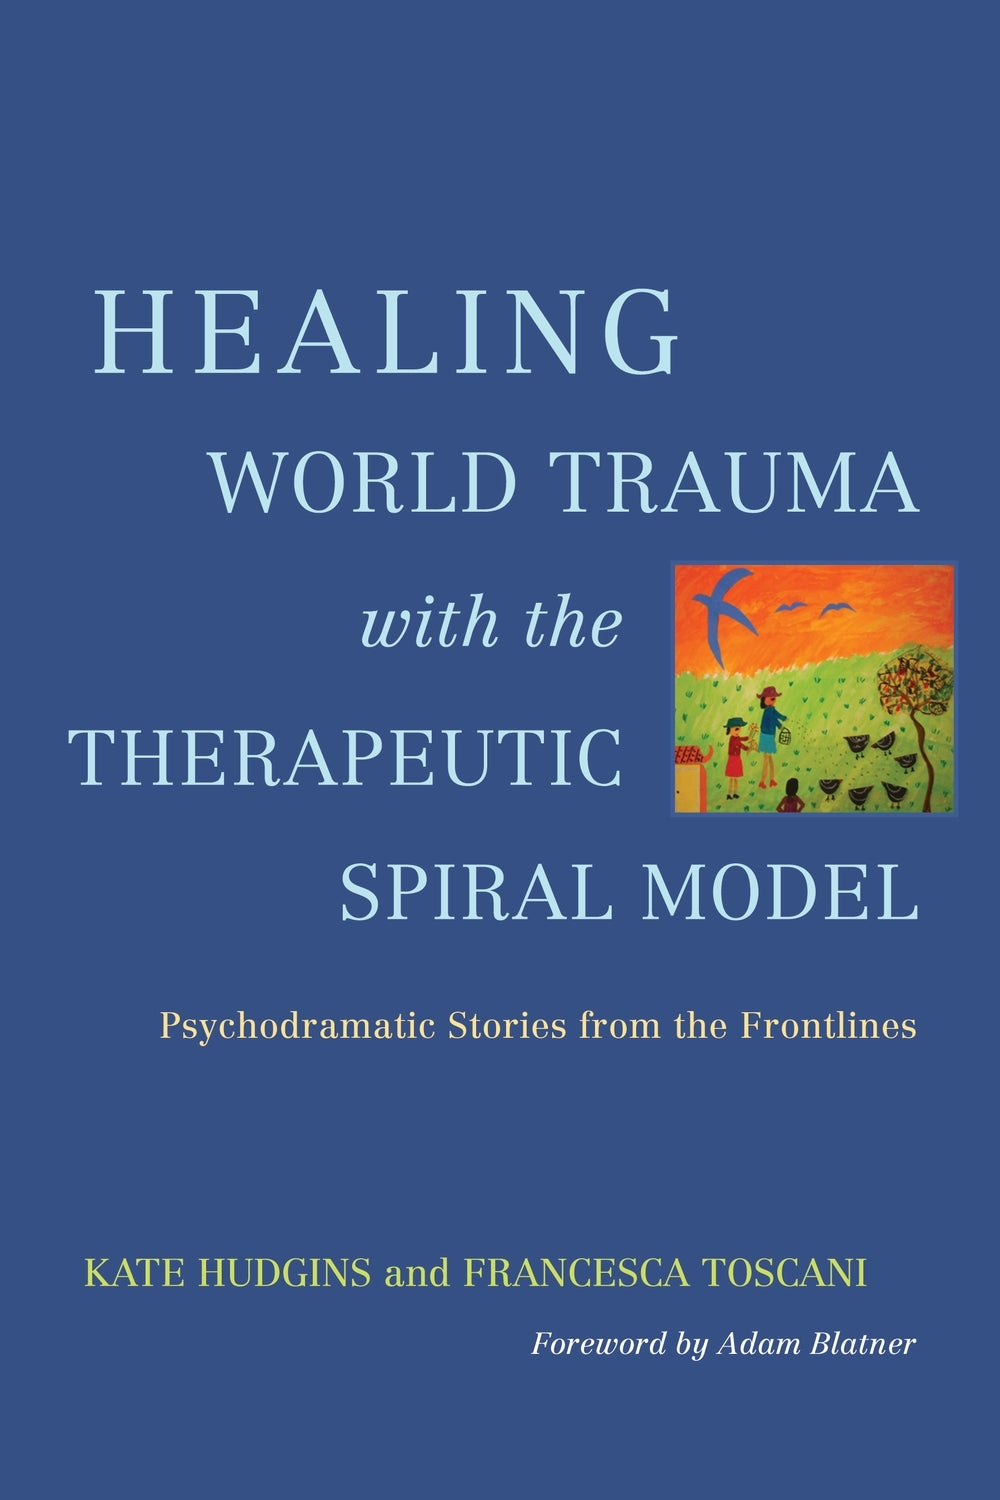 Healing World Trauma with the Therapeutic Spiral Model by No Author Listed, Adam Blatner, Kate Hudgins, Francesca Toscani